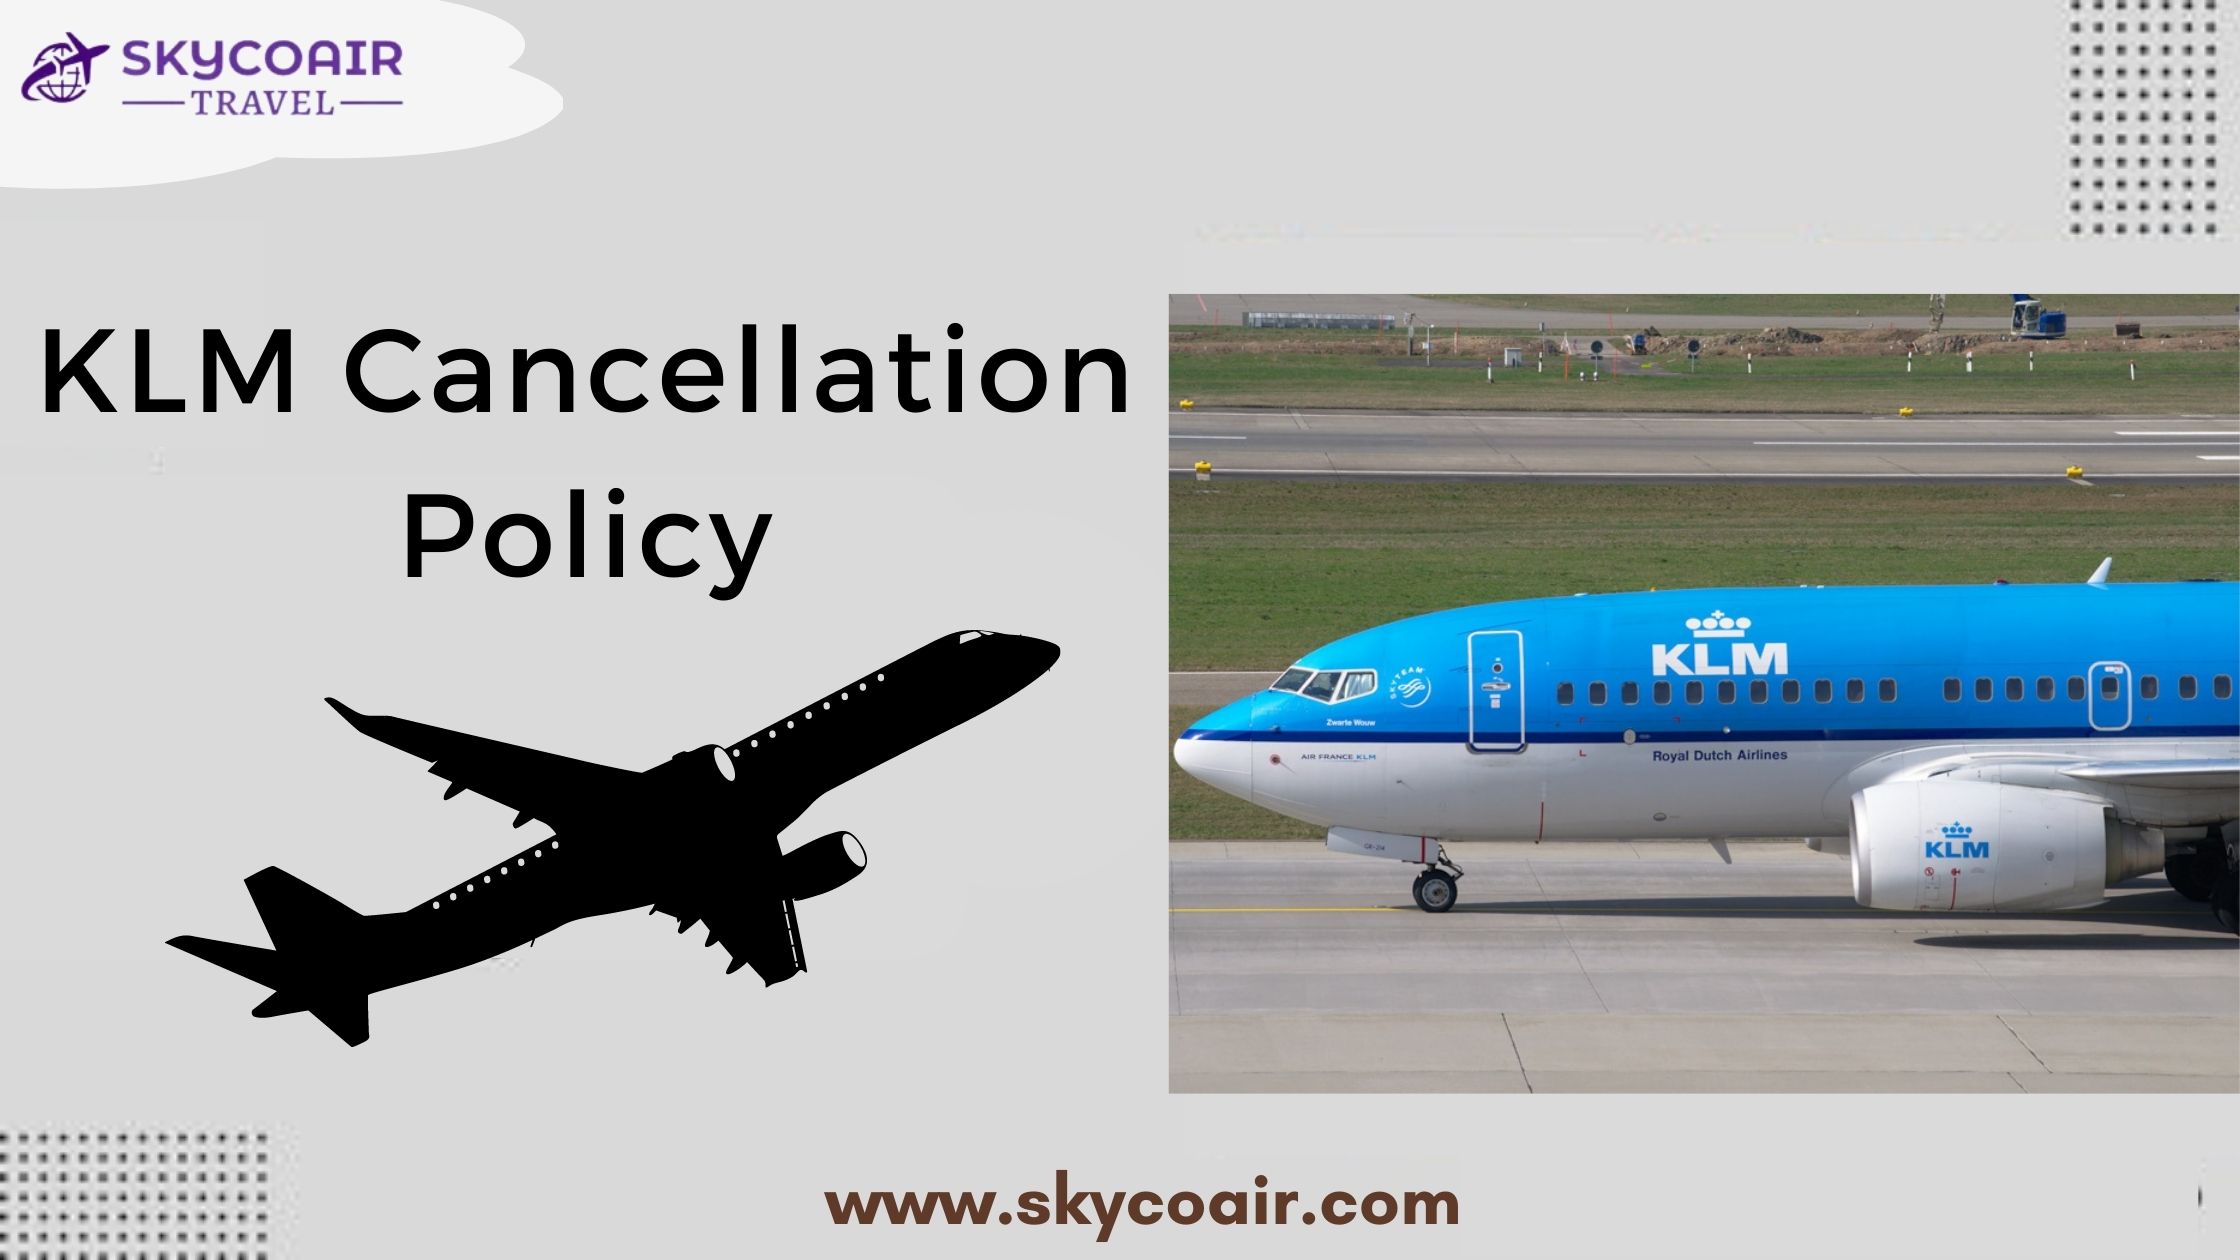 Klm Cancellation Policy